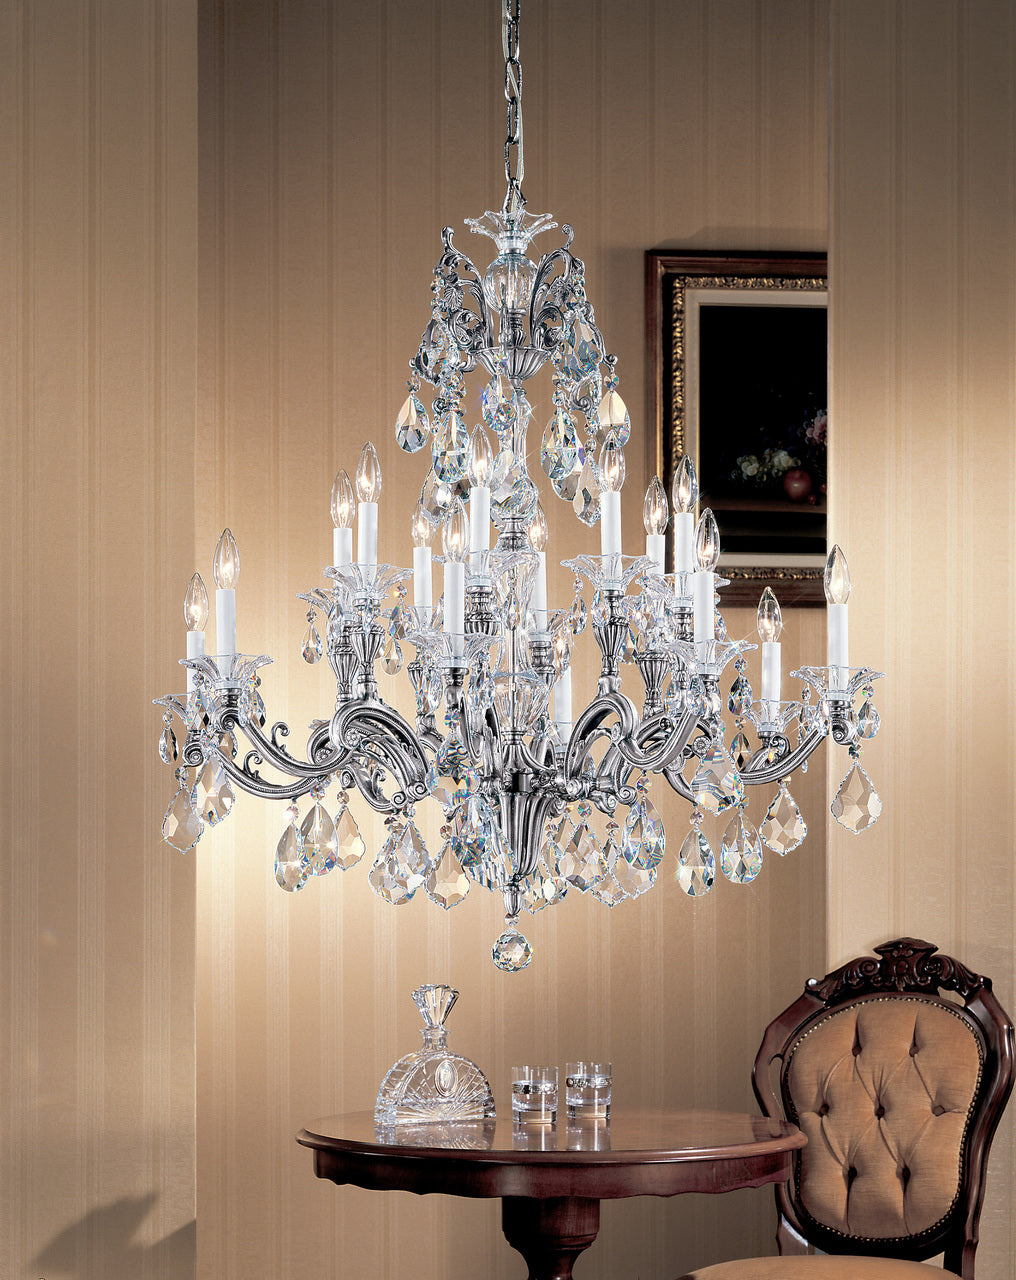 Classic Lighting 57116 SP S Via Firenze Crystal Chandelier in Silver (Imported from Spain)